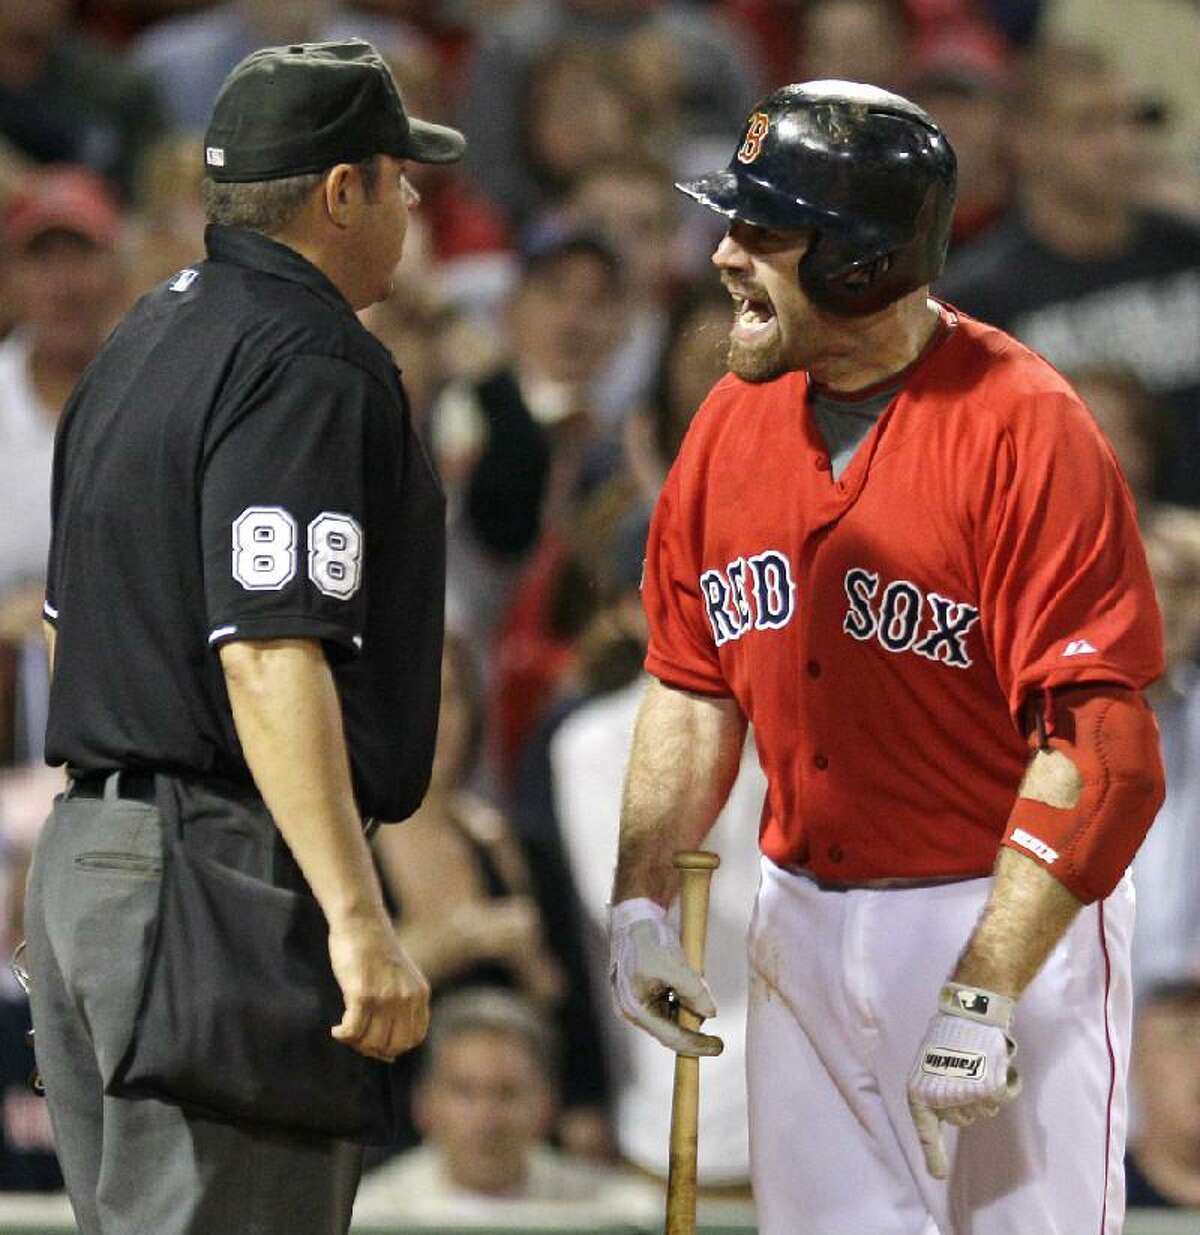 ASSOCIATED PRESS Boston Red Sox third baseman Kevin Youkilis argues with home plate umpire Doug Eddings after being called out looking with the bases loaded against the Washington Nationals in the sixth inning of Friday night's game at Fenway Park in Boston. Youkilis was ejected during the argument.